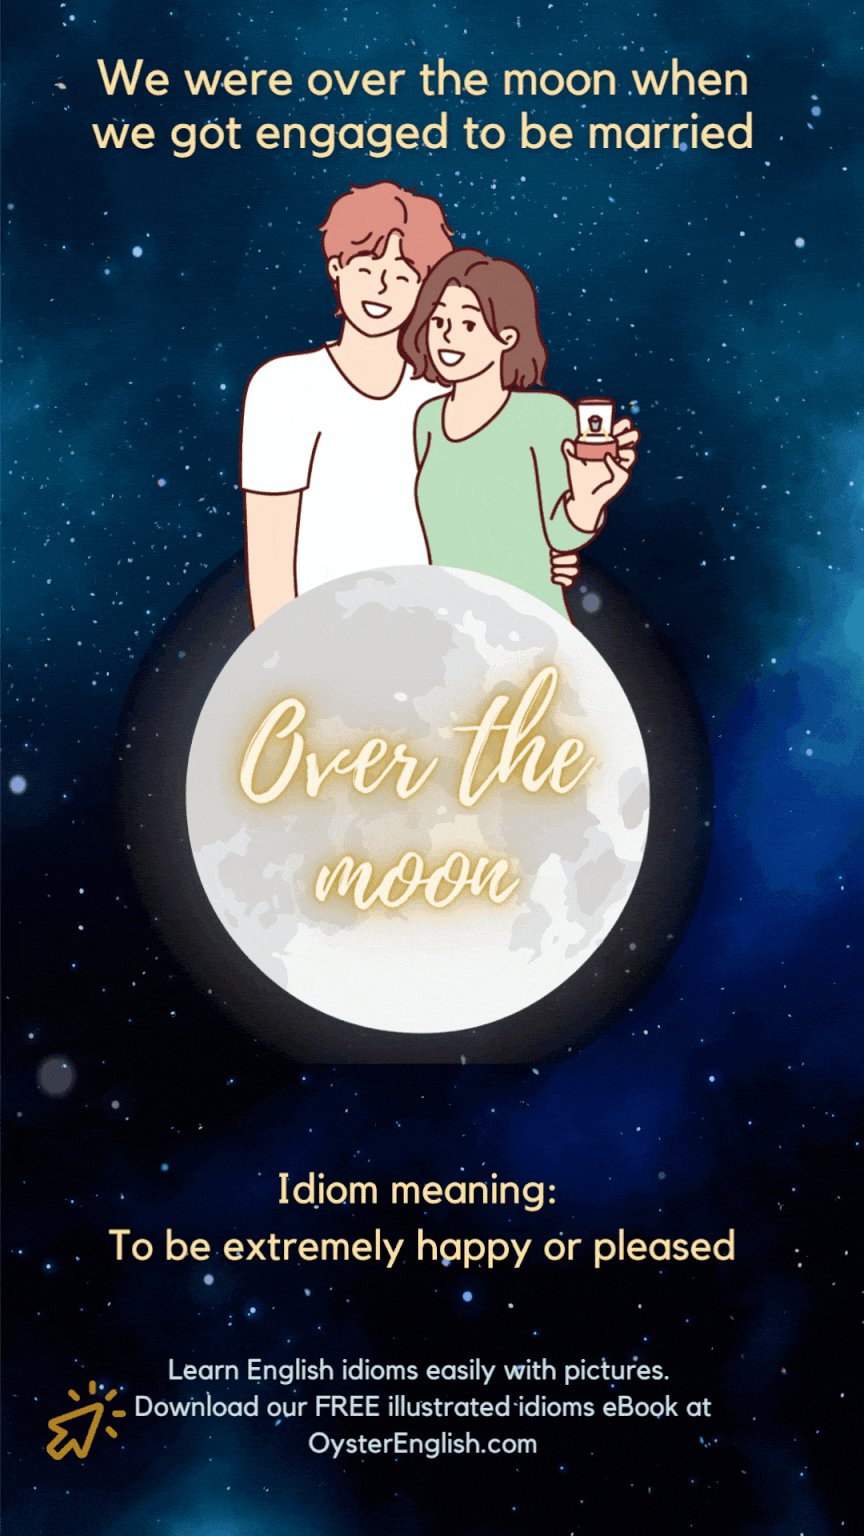 Illustration of a joyful couple emerging from the top of a full moon, holding an engagement ring box under a starry sky, symbolizing the idiom 'over the moon' to express their happiness upon getting engaged.